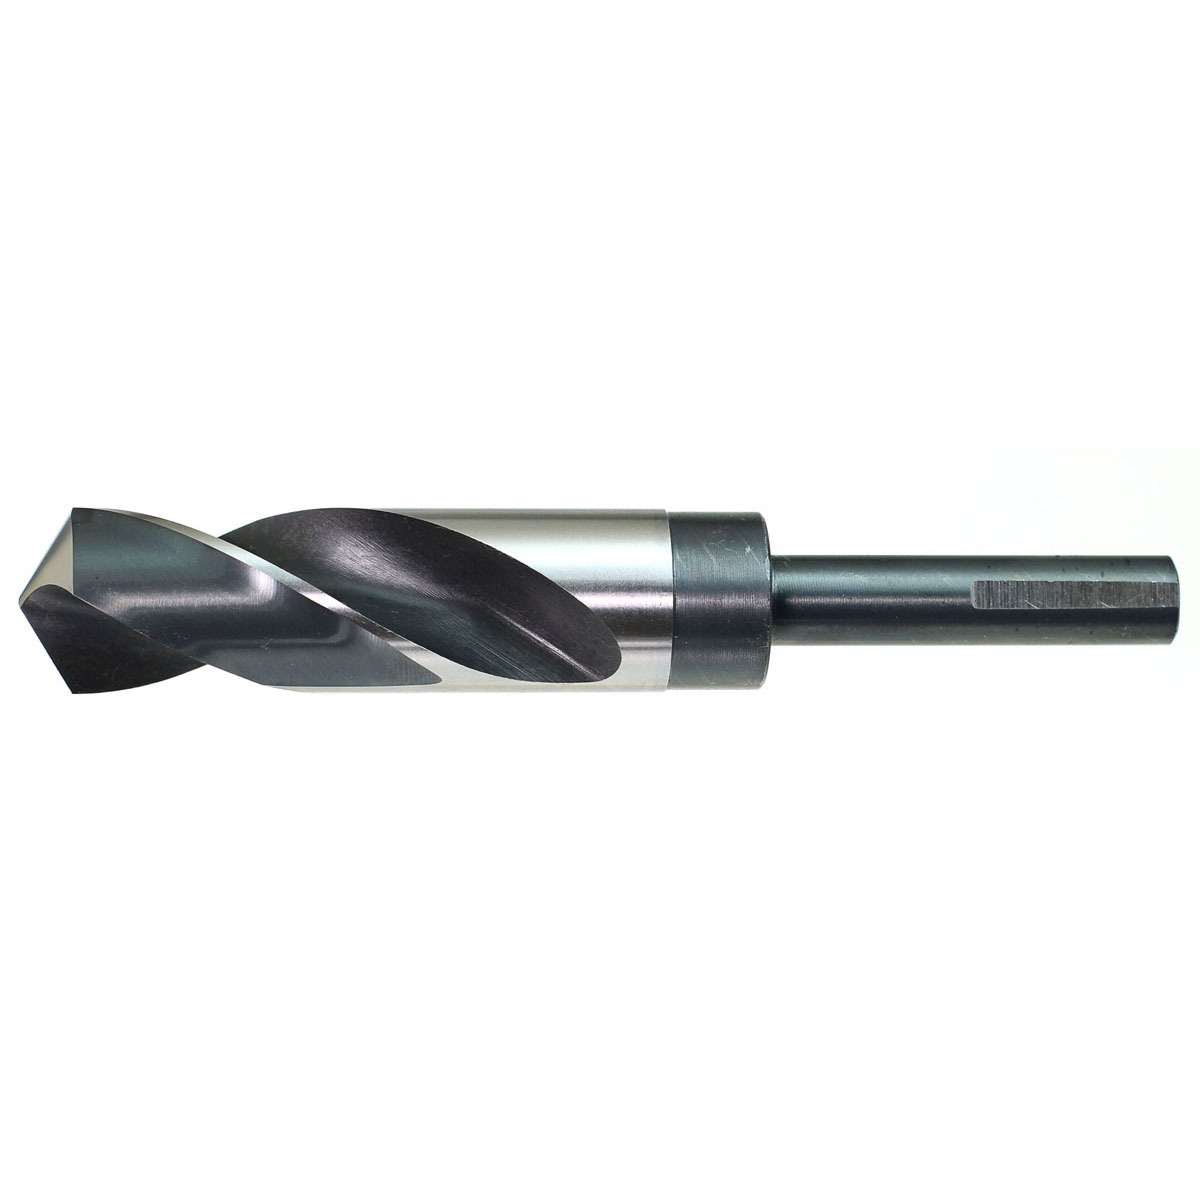 3 Units Drillco Series 1000E 5/8 X 6 Bright and Black HSS General Purpose S&D Drill Bit with 1/2 Flat Reduced Shank and 3 Spiral Flute 